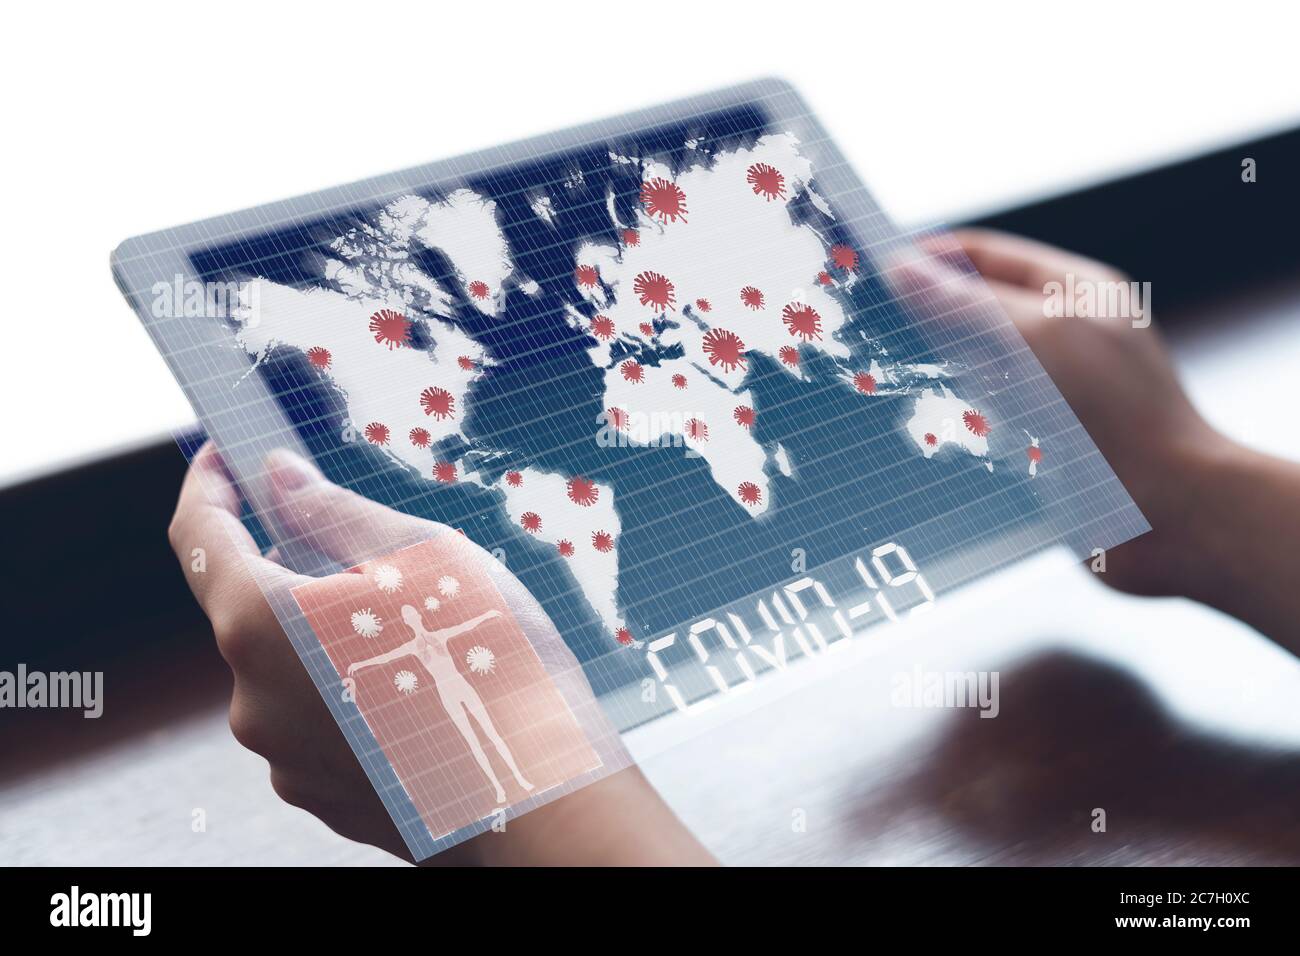 Woman holding tablet watching world map with Coronavirus or Covid-19 outbreak around the world Stock Photo